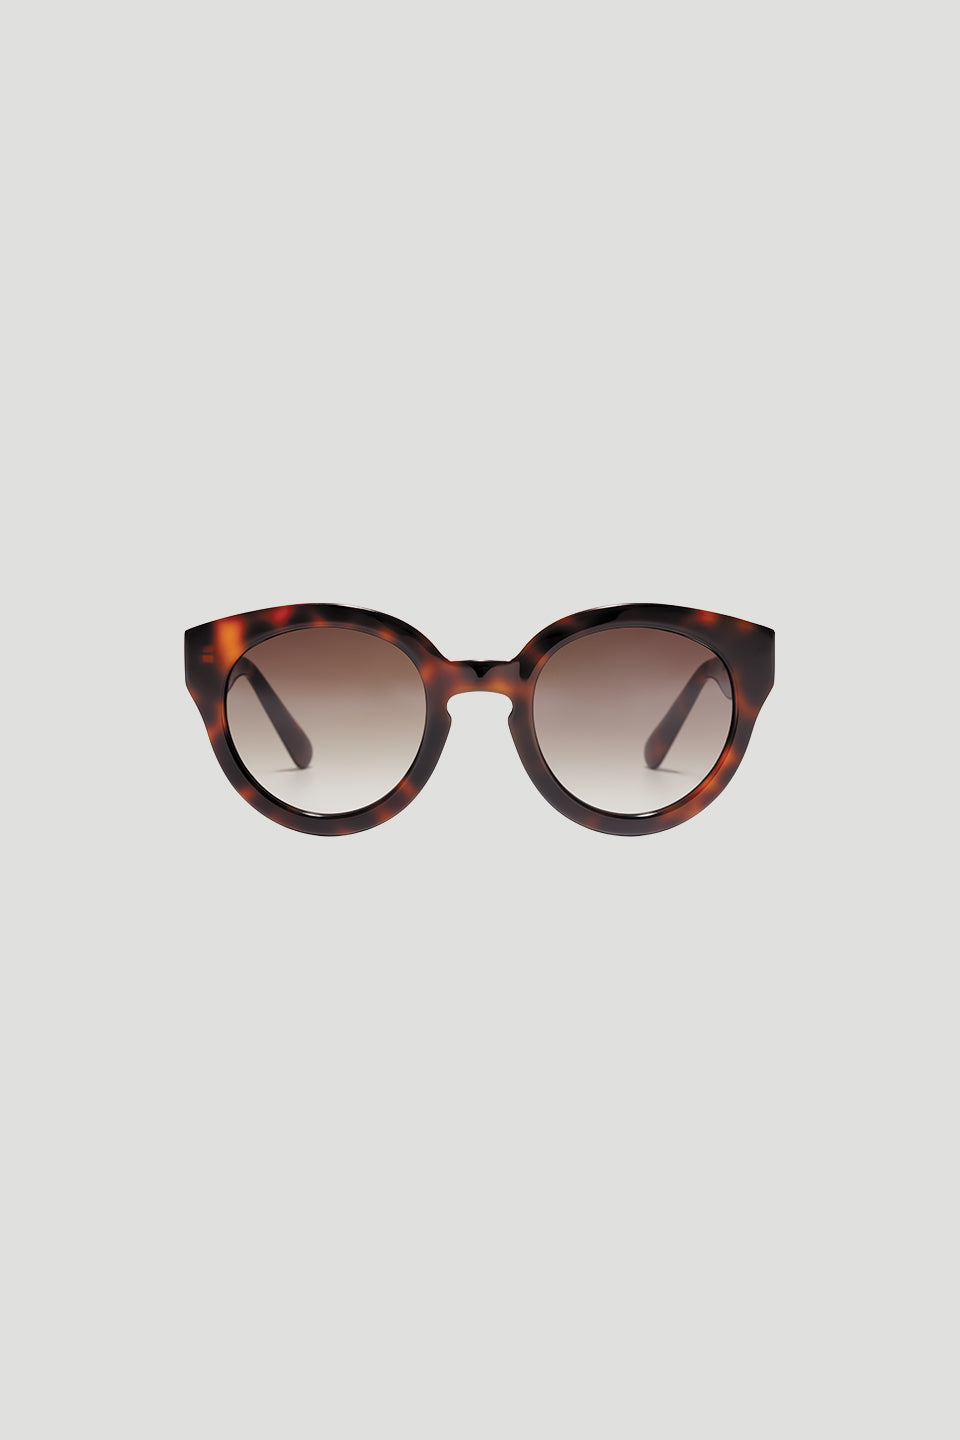 Sunglasses The Mindful Cherrywood